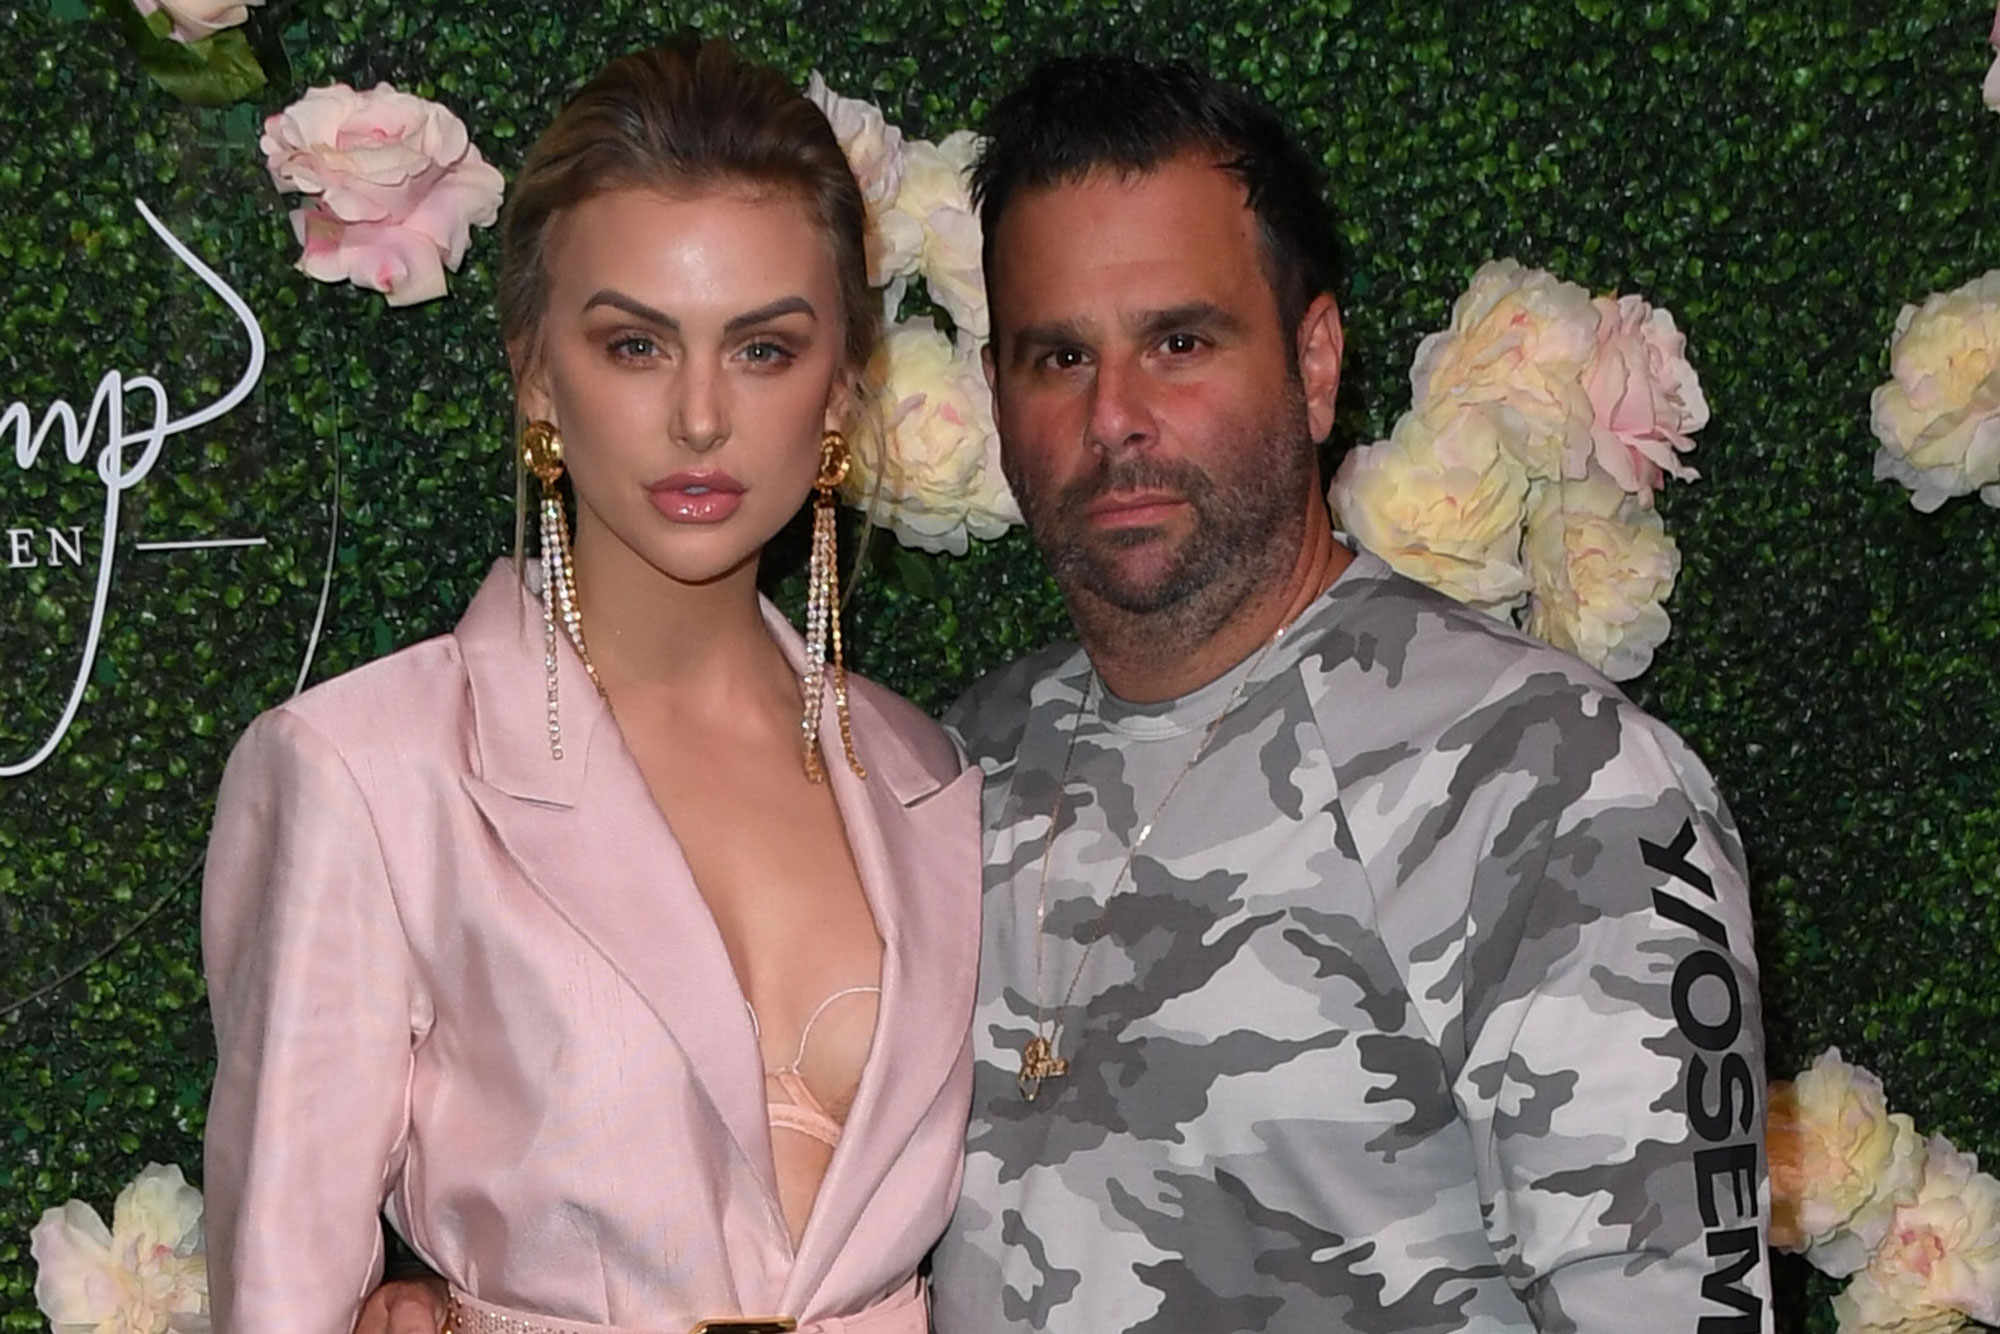 Lala Kent and Randall Emmett welcomed their first child together.